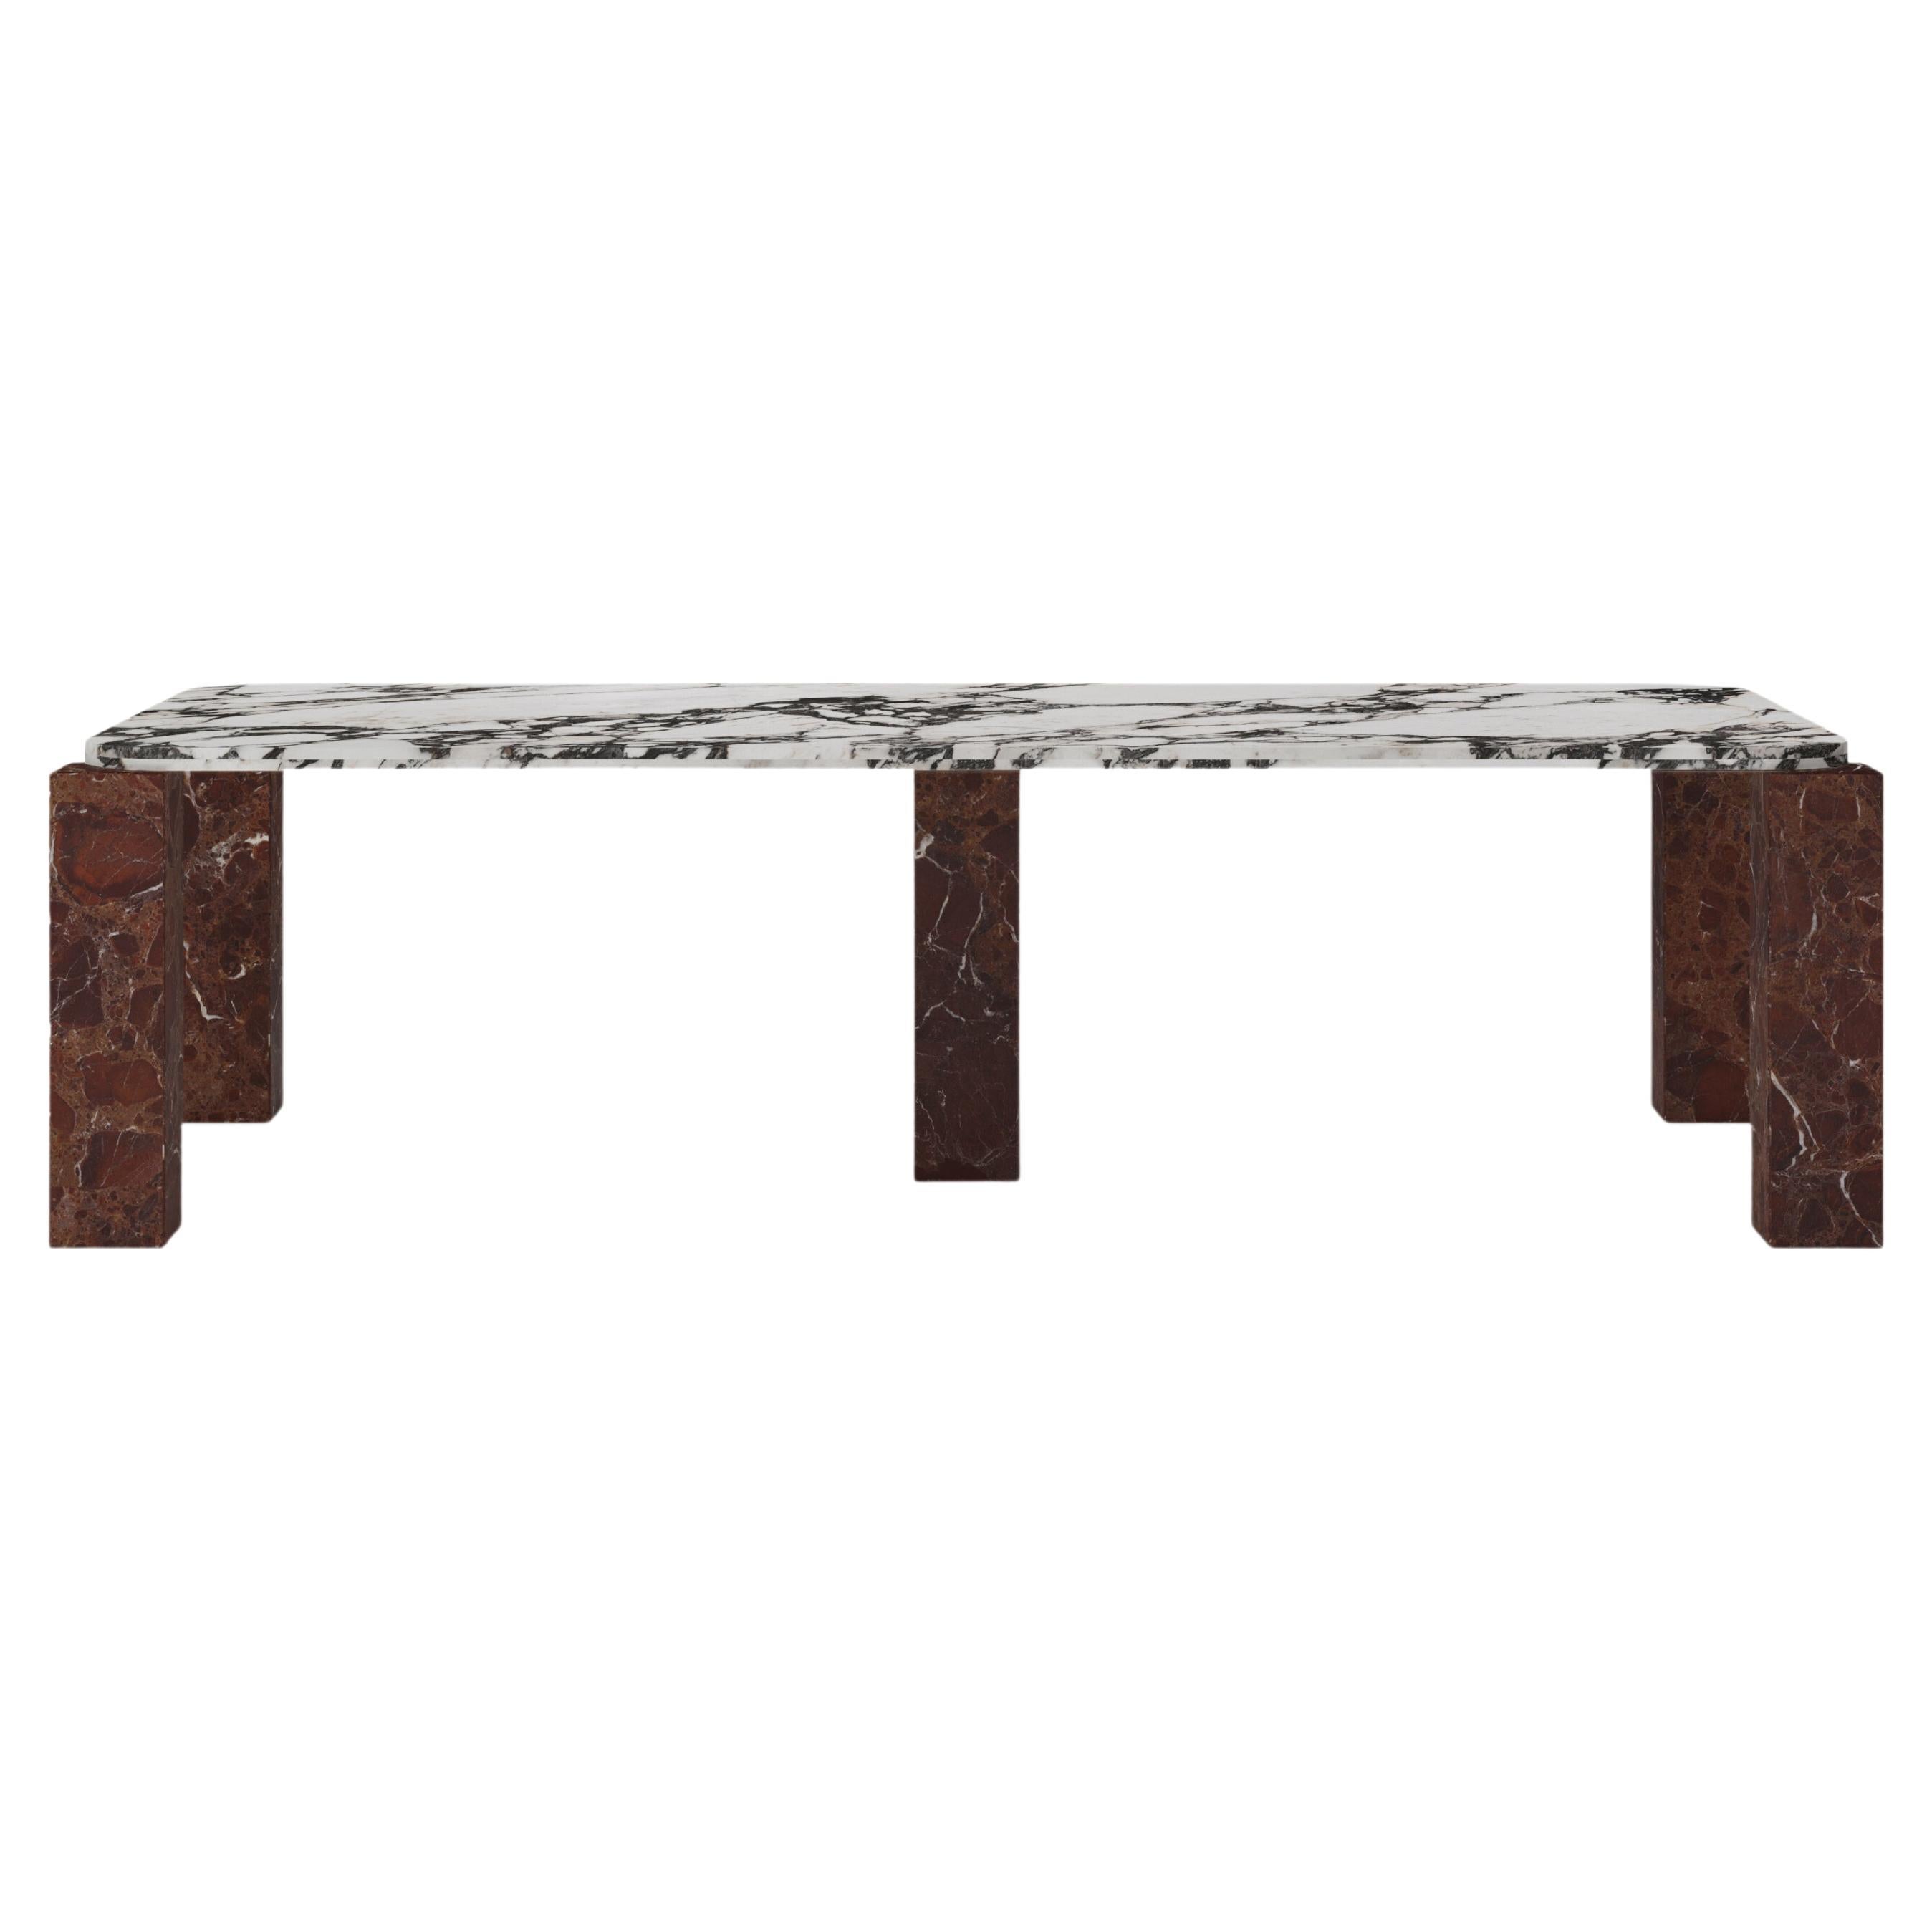 FORM(LA) Cubo Rectangle Dining Table 98”L x 44”W x 30”H Viola & Rosso Marble